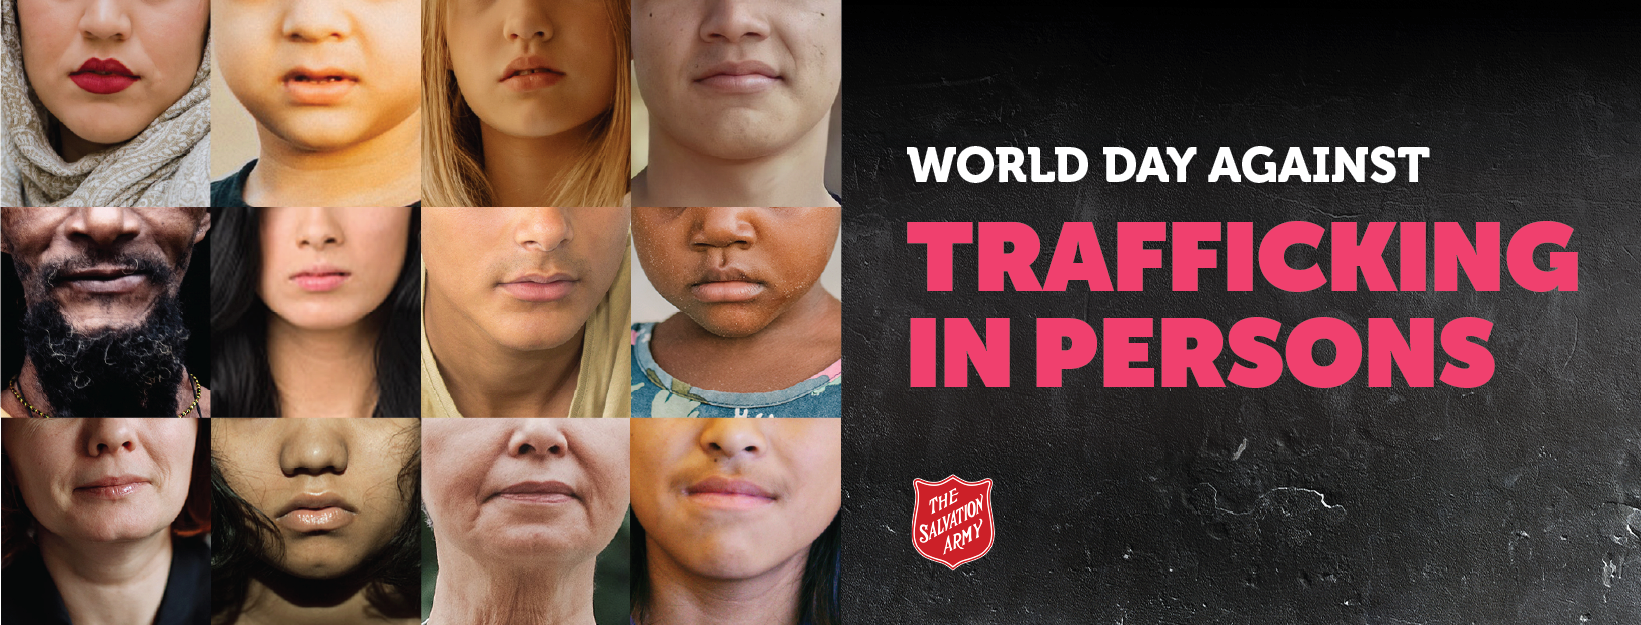 World day against trafficking in persons Image for Facebook banner